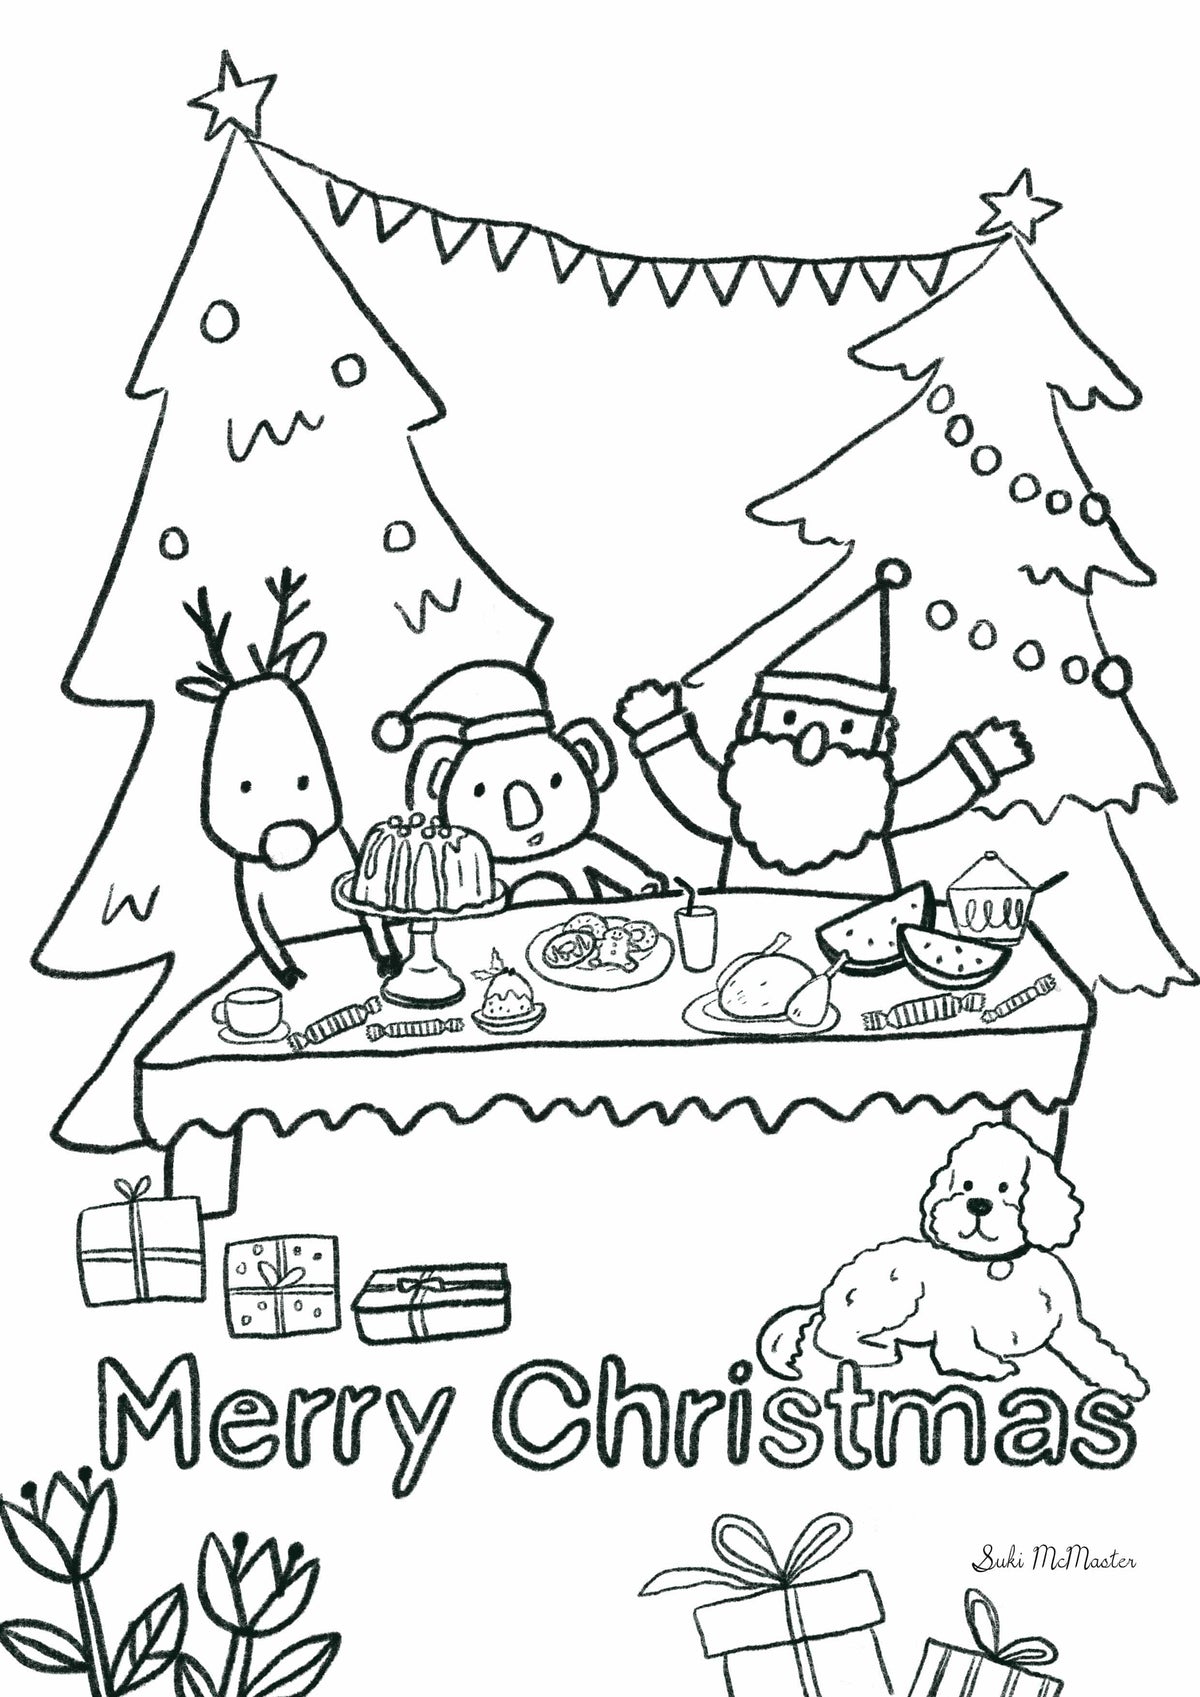 christmas-colouring-in-free-download-sukimcmaster